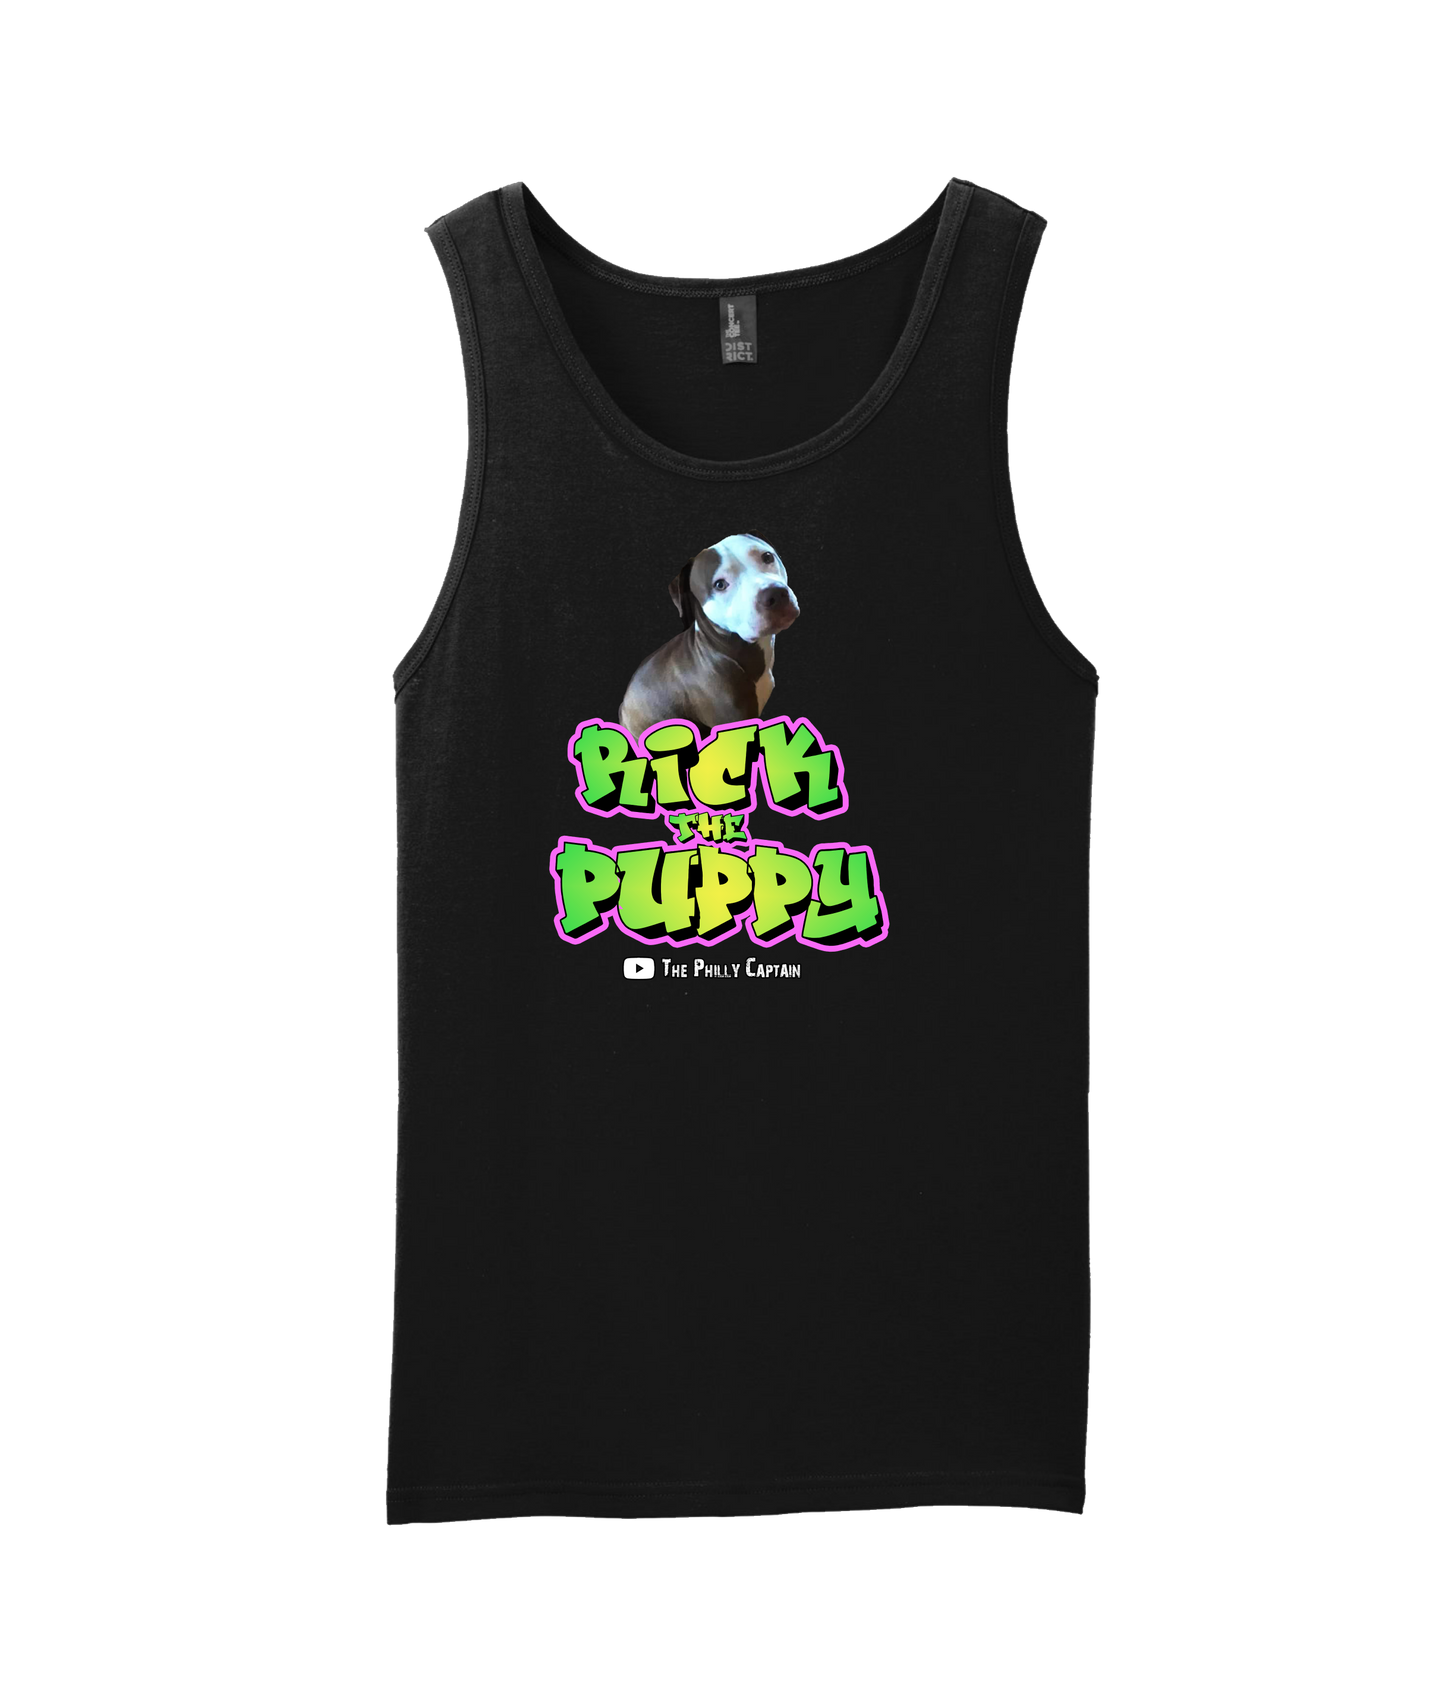 The Philly Captain's Merch is Fire - Rick the Puppy - Black Tank Top